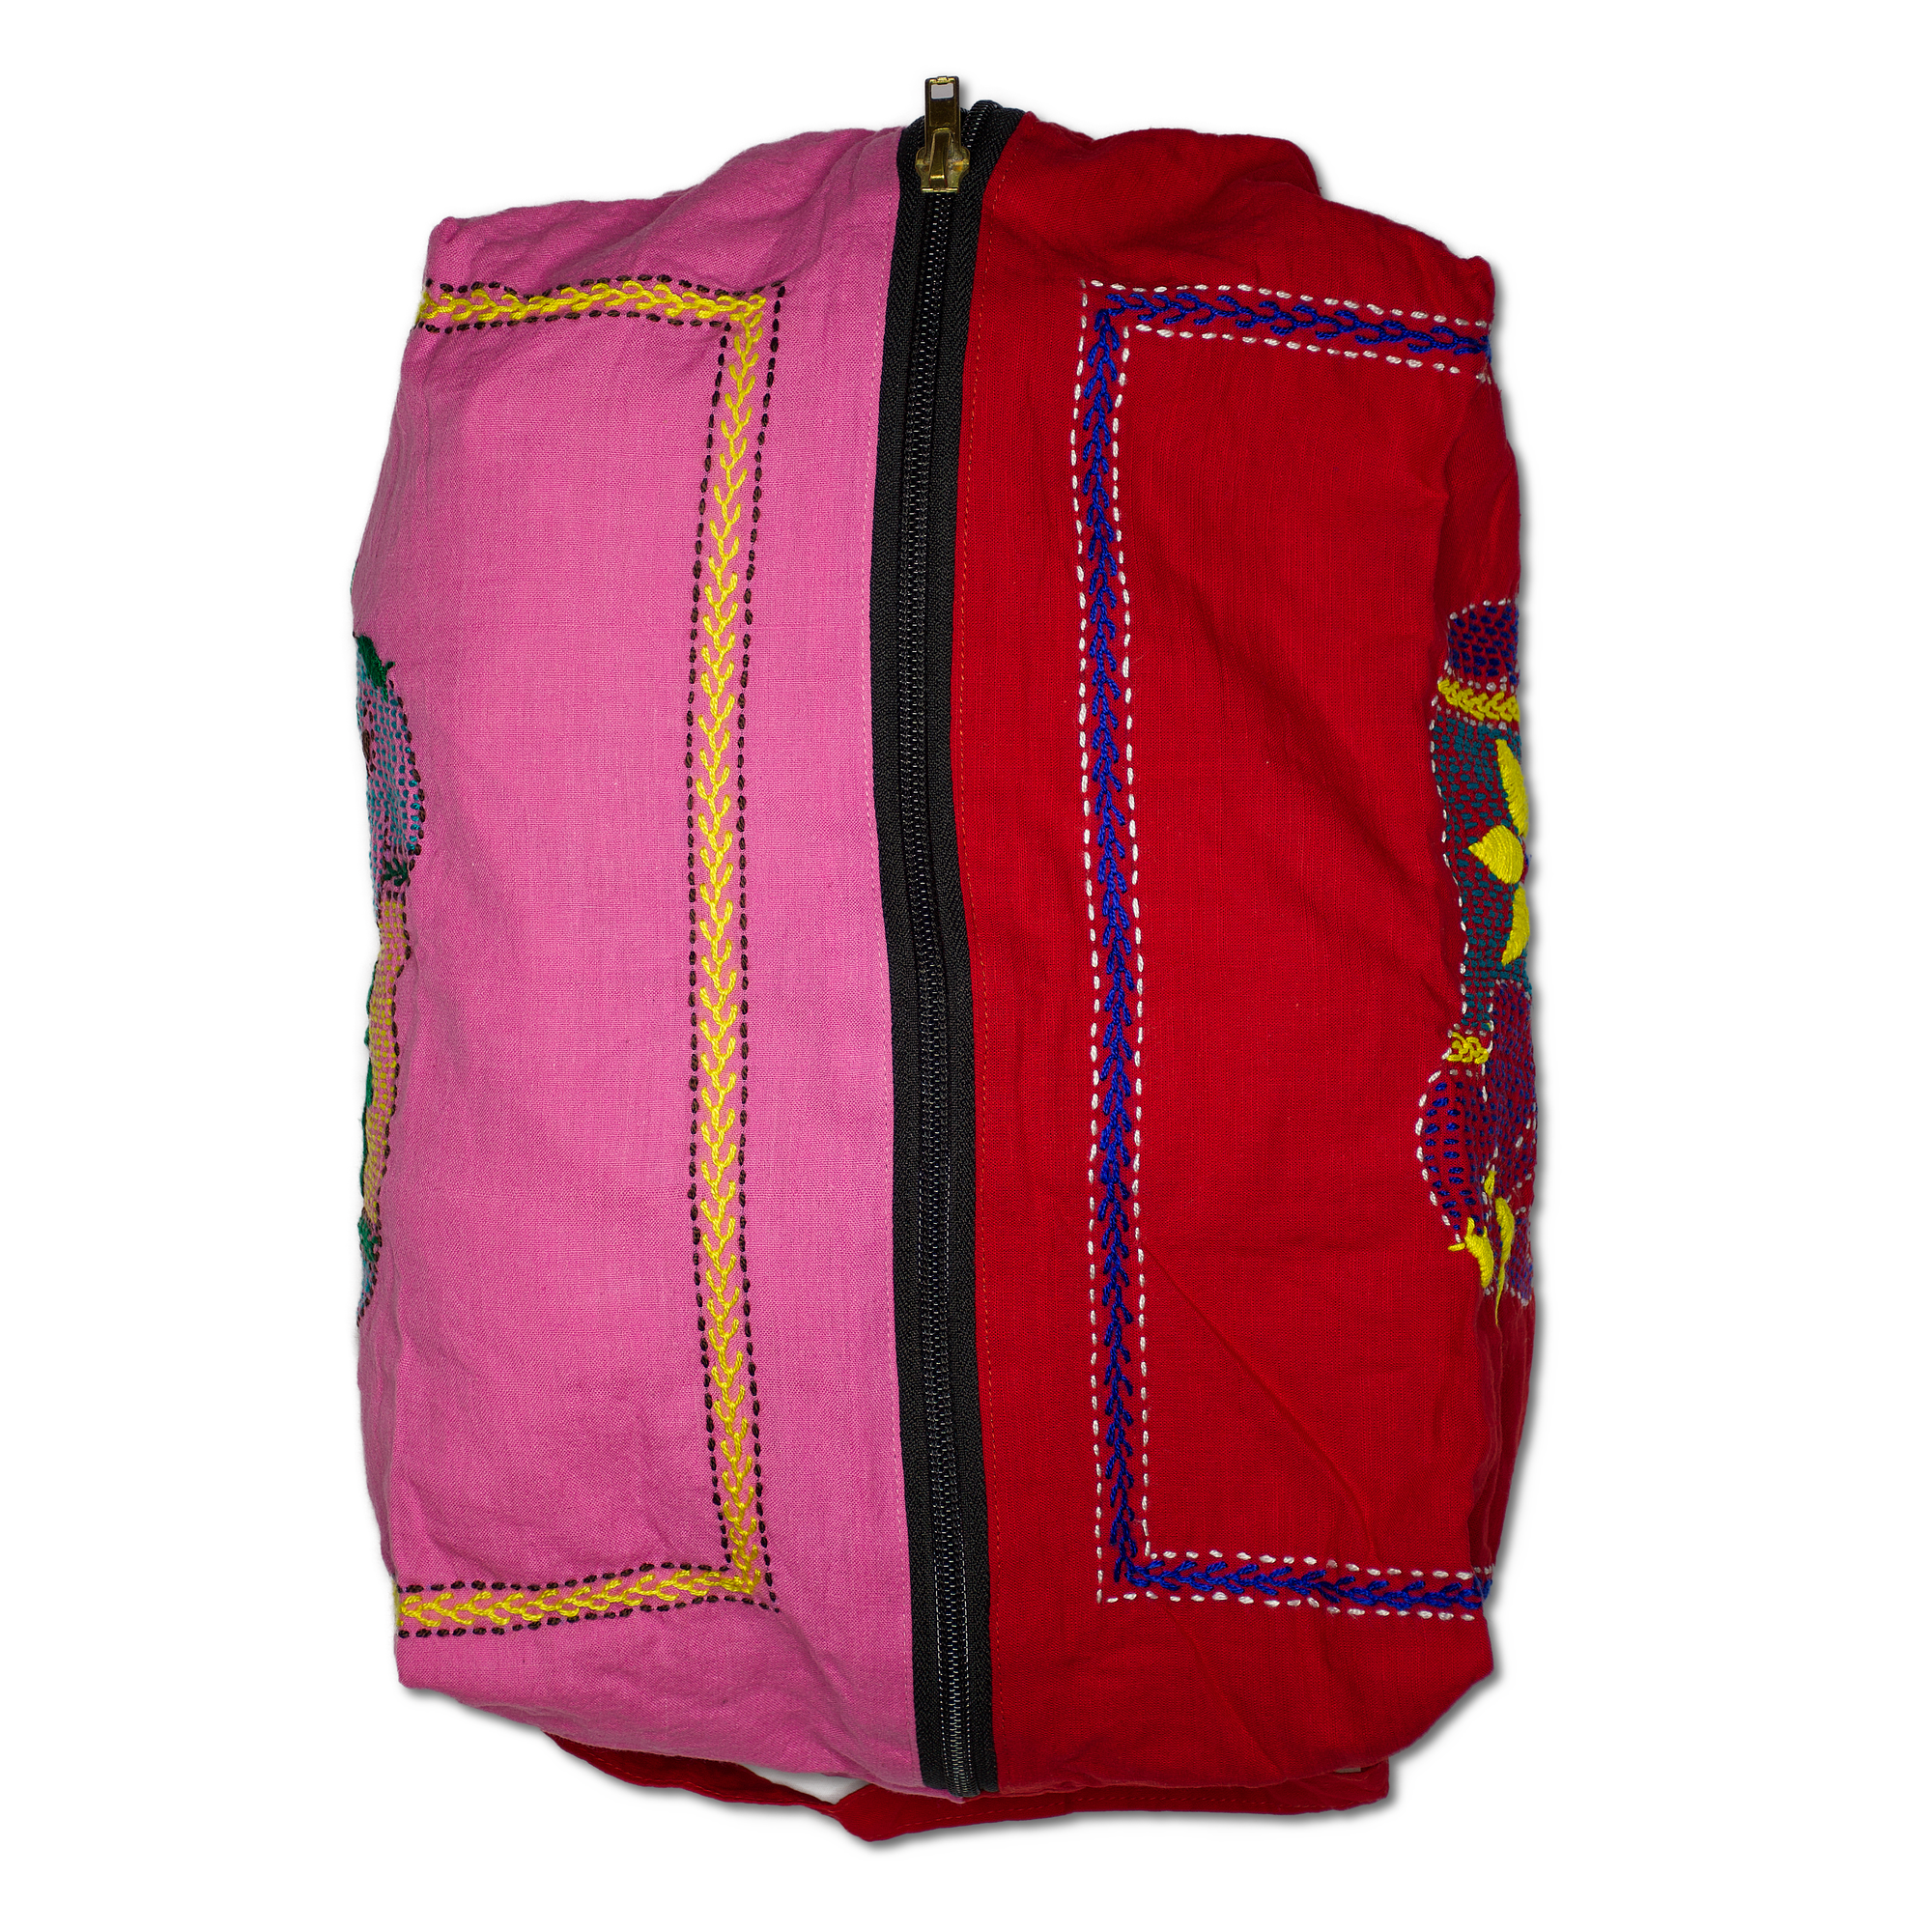 Pouch Bags - Dinajpur (elephant) Design - Sumi (Red) / Shopna (Pink)